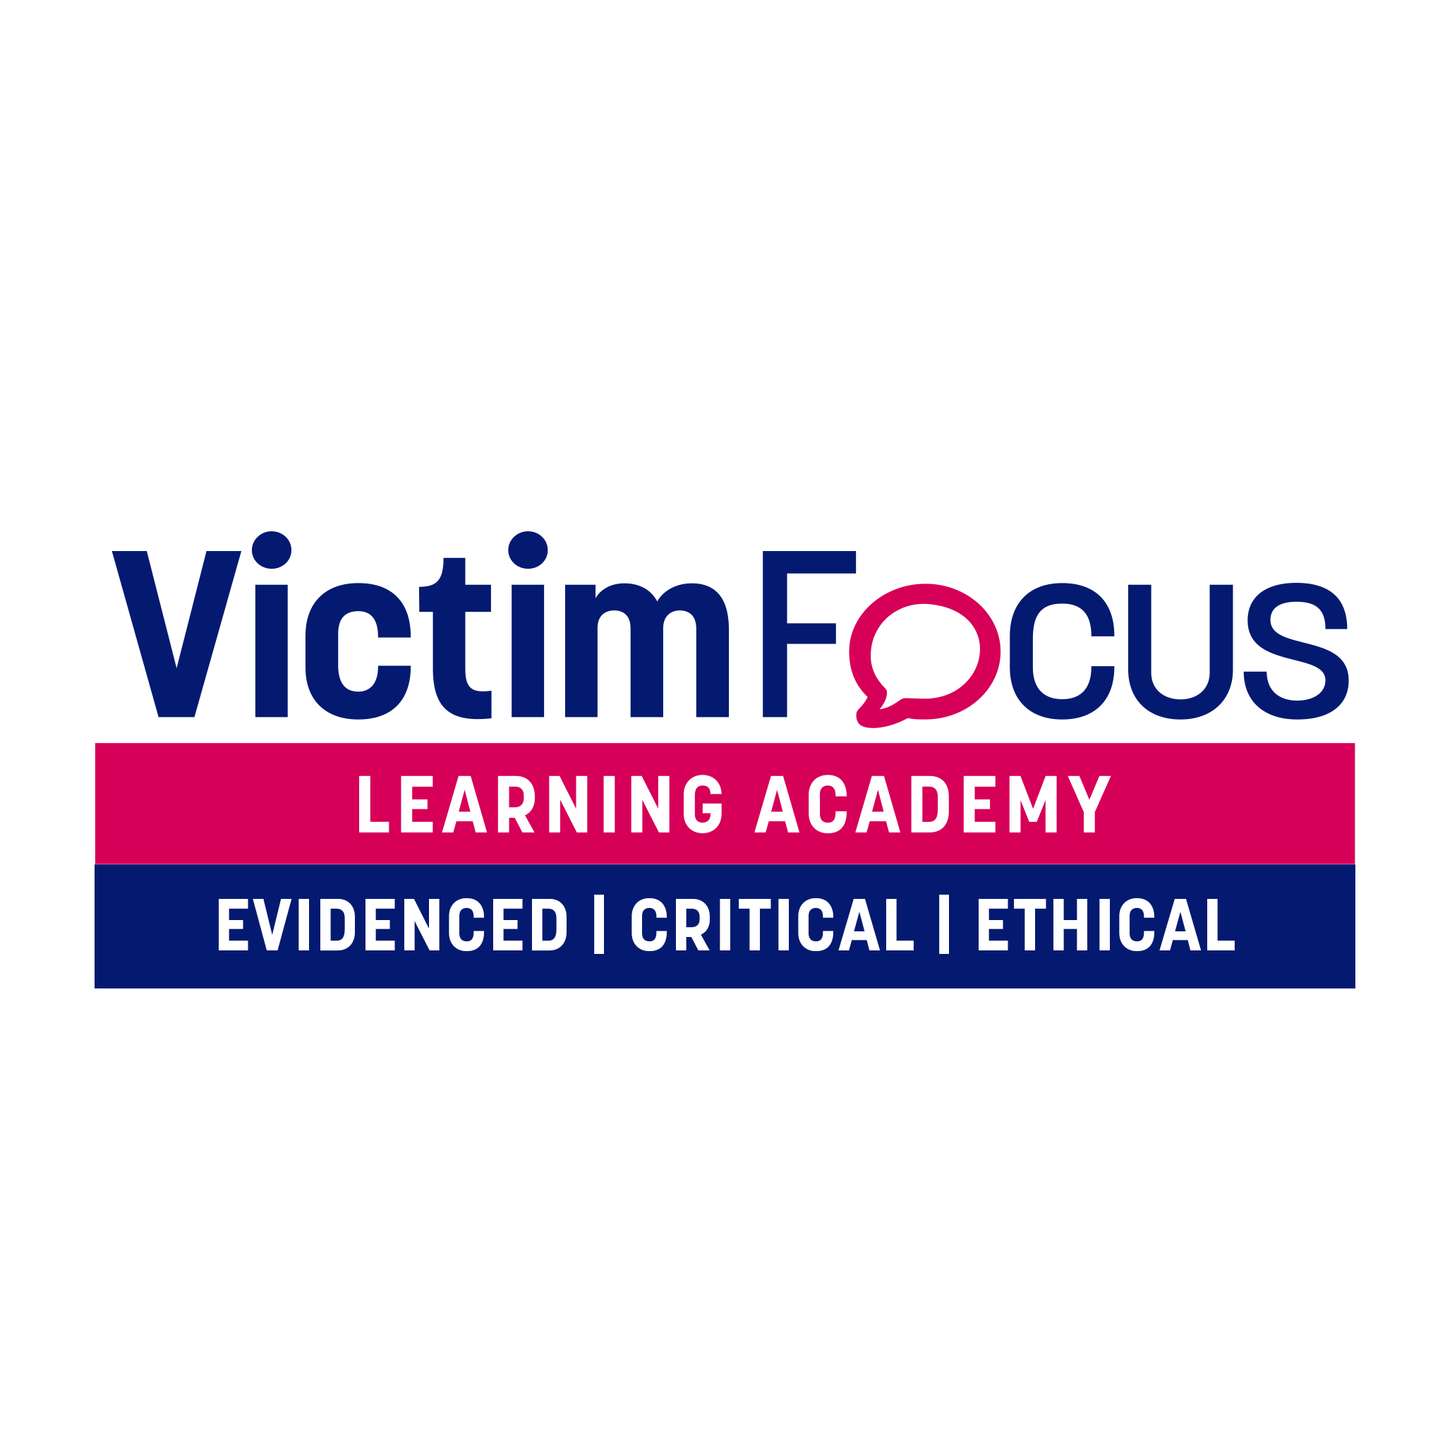 Supporting Survivors of Abuse and Sexual Violence with Sex and Intimacy - VictimFocus Academy Online Course